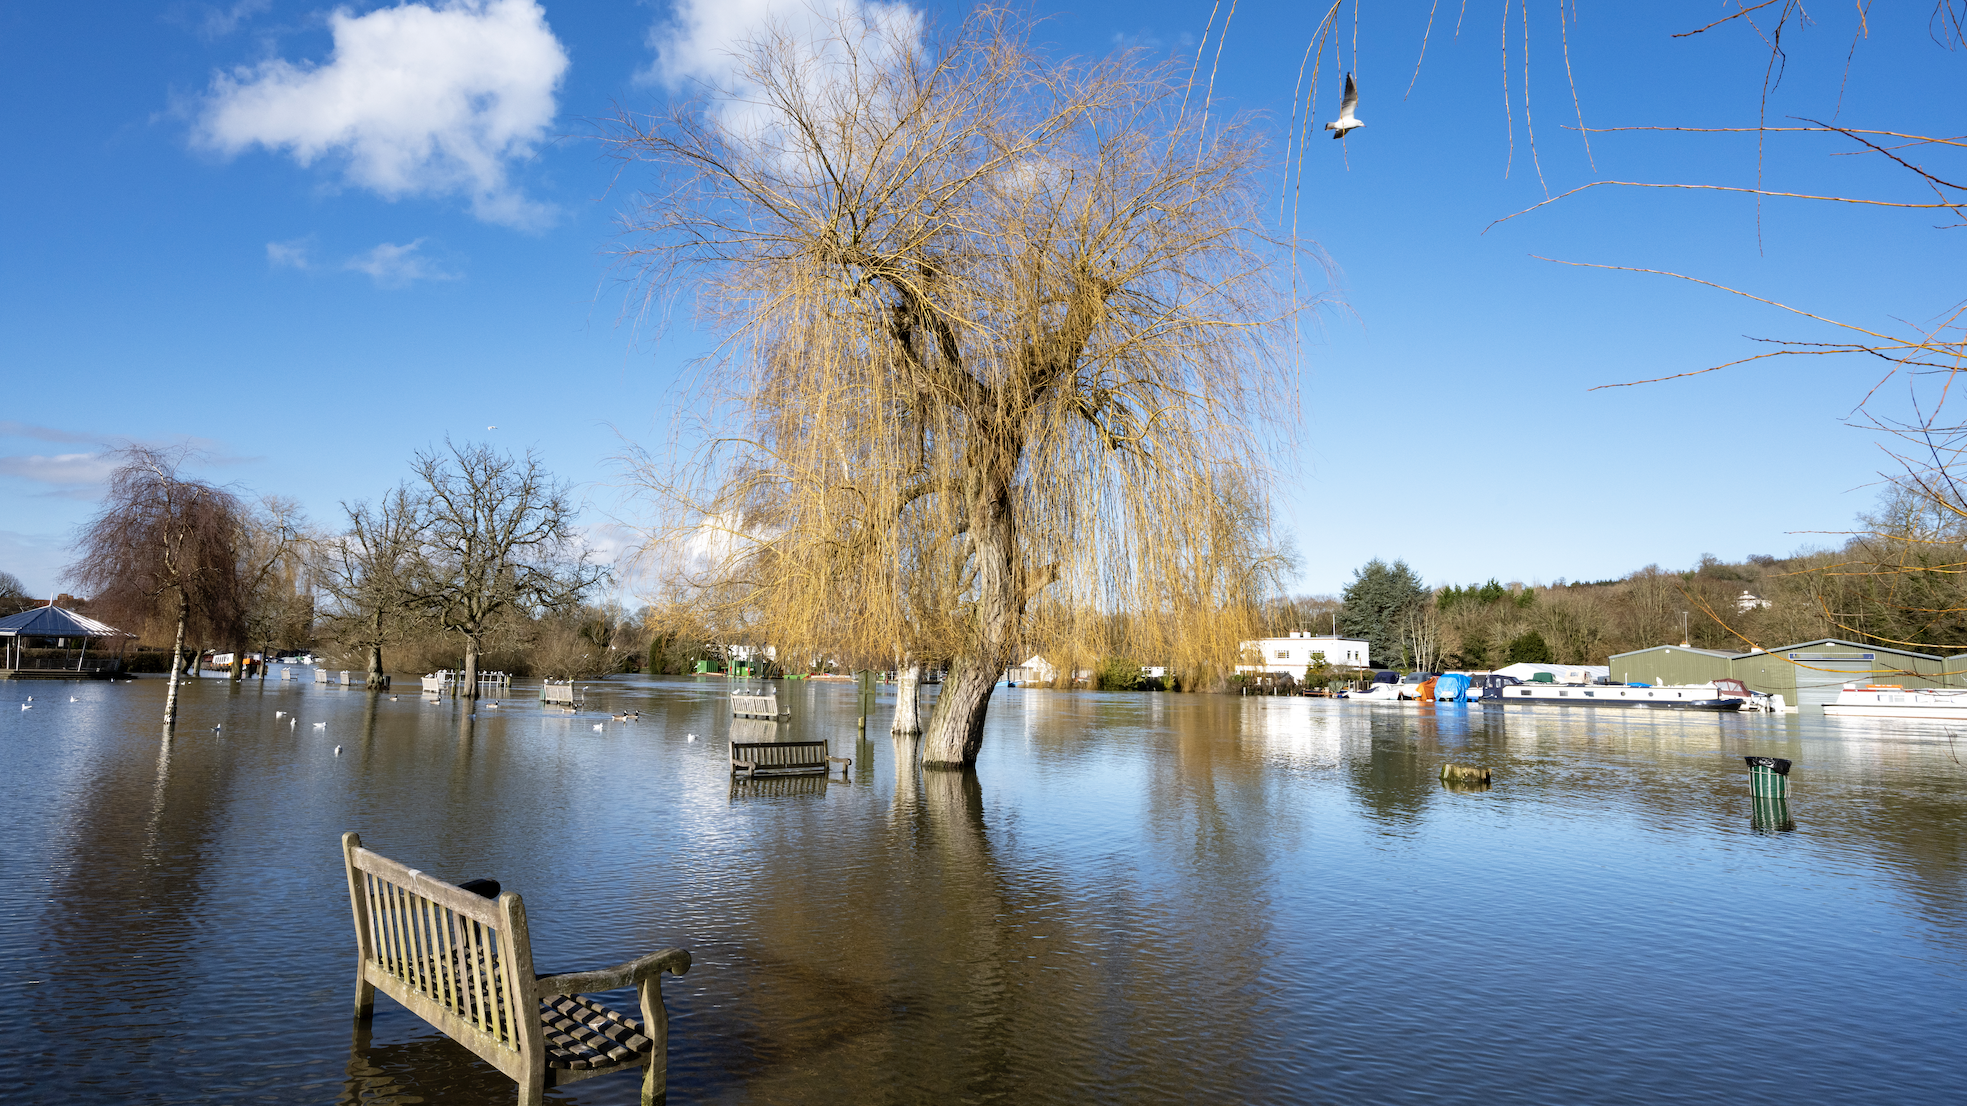 Flooded park with benches and the bottom of a tree partially submerged in water.